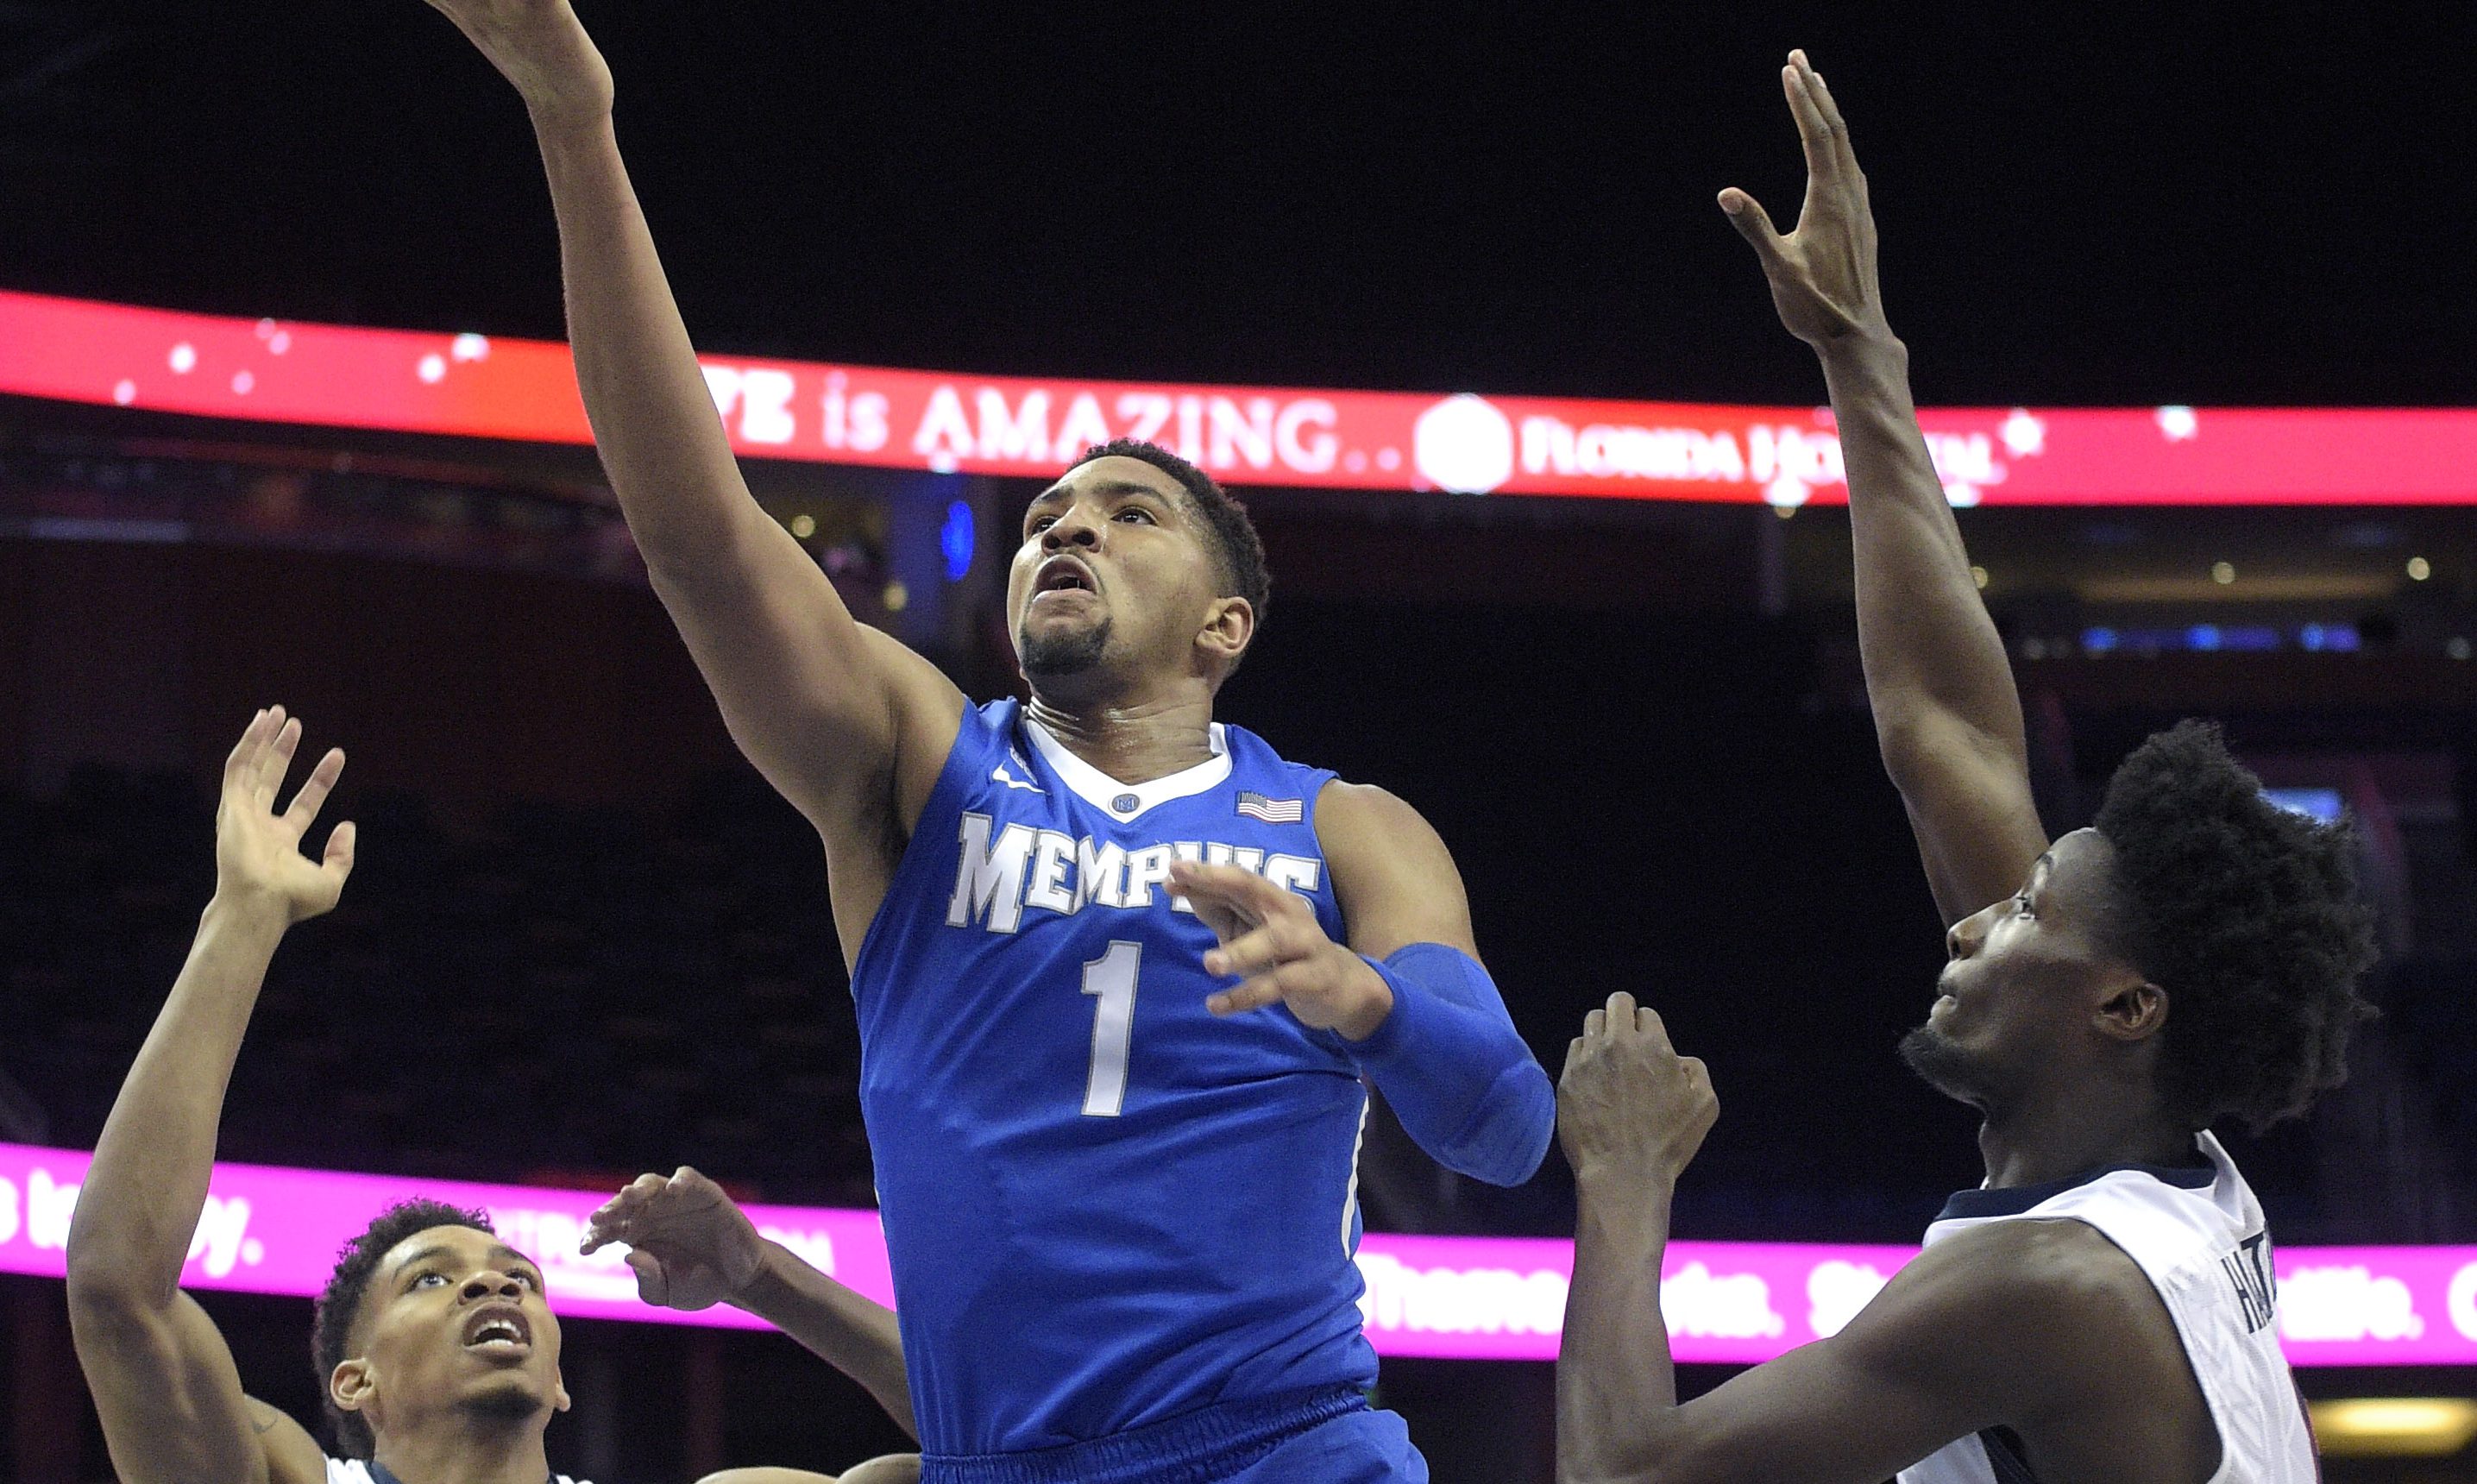 Memphis forward Dedric Lawson (1) goes up for a shot between Connecticut forward Shonn Miller (32) and guard Daniel Hamilton, right, during the first half of an NCAA college basketball game in the finals of the American Athletic Conference men's tournament in Orlando, Fla., Sunday, March 13, 2016. (AP Photo/Phelan M. Ebenhack)